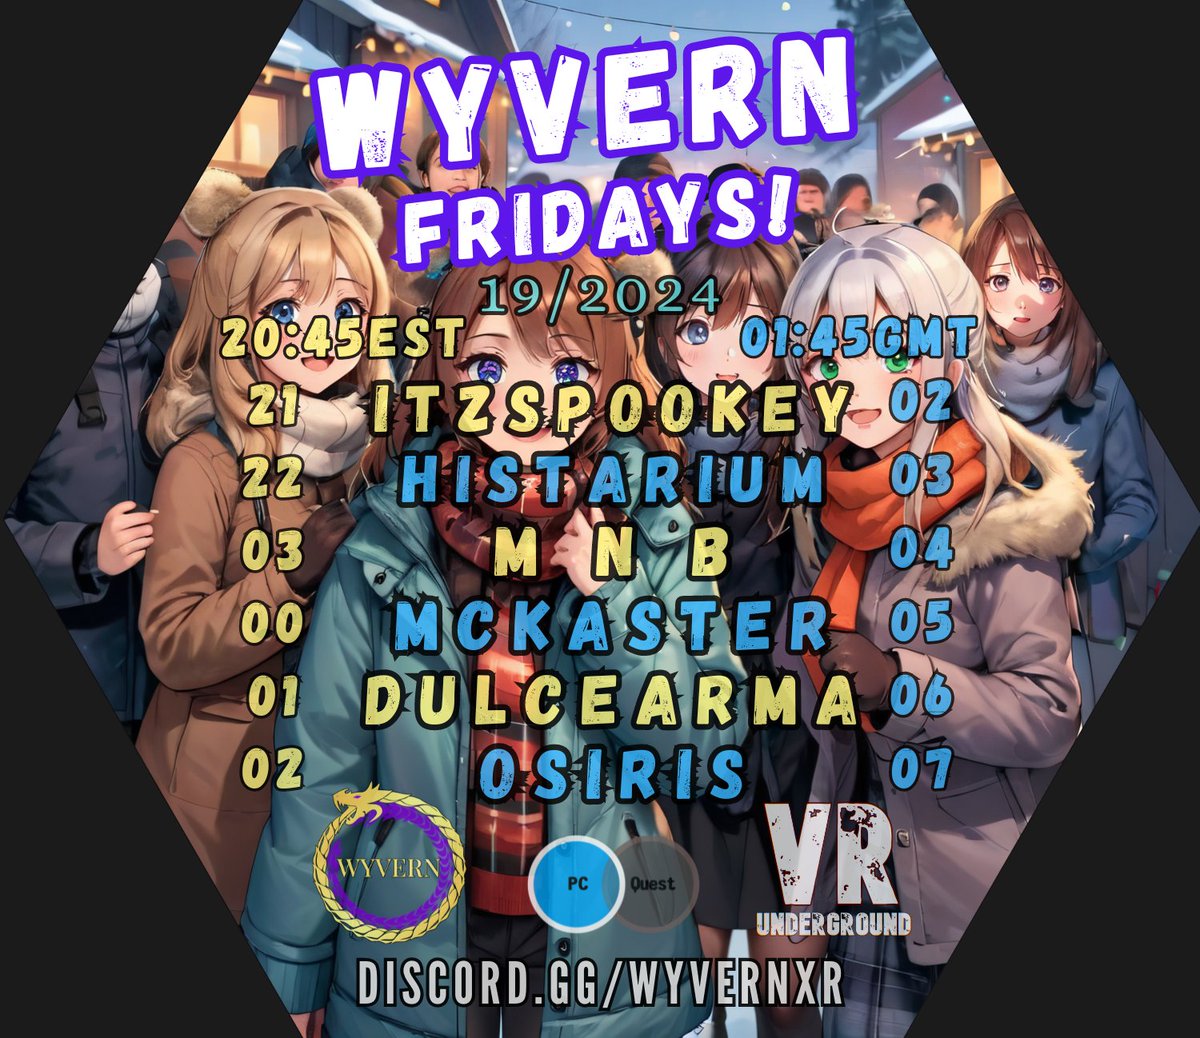 Wyvern Fridays are BACK! - Join us~ 💜💛💜
18+ (SFW Event) Doors: 20:45EST | 02:45GMT  
↓   Discord   ↓   | ------------------------ |   ↓   VRC Group  ↓                      discord.gg/Wyvernxr  |  vrc.group/WYVERN.9611 

#Wyvern #VRChat #liveDJ #VirtualEvent